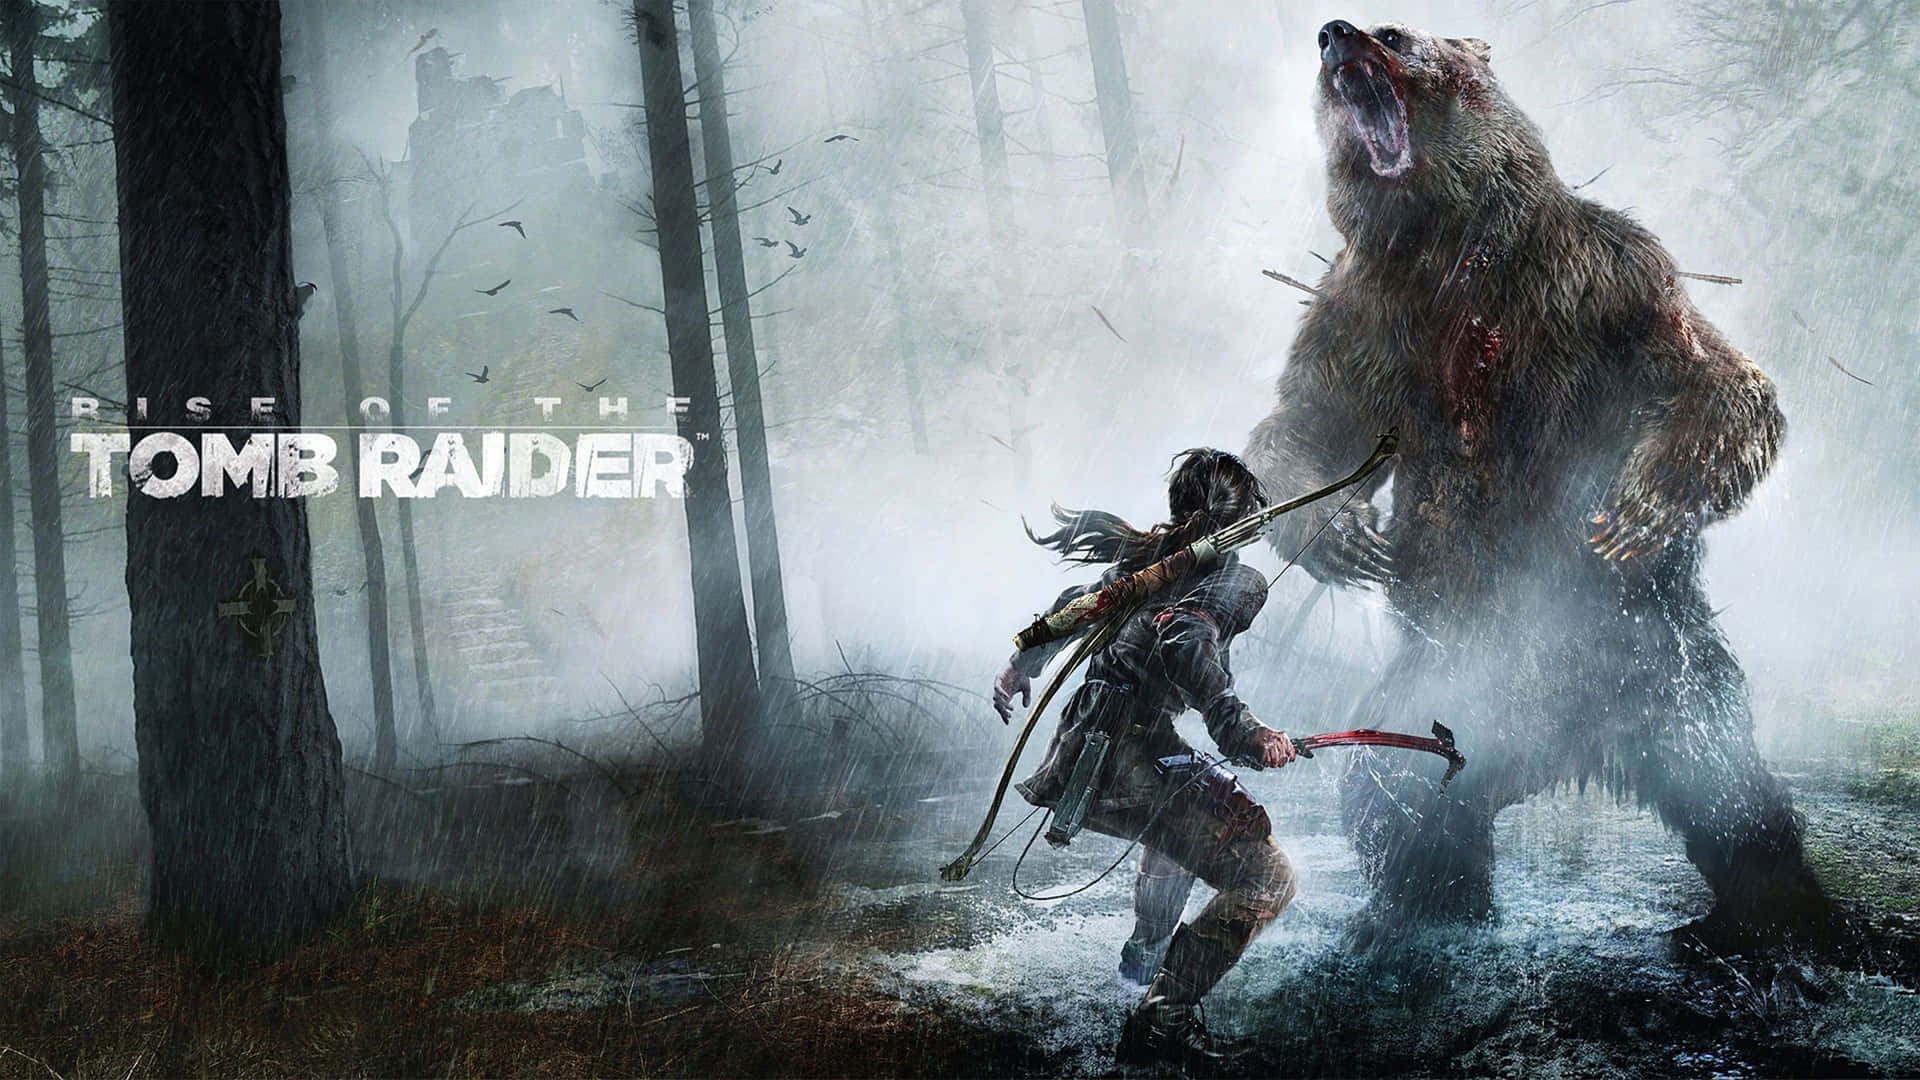 'Lara Croft In Action In The Rise Of Tomb Raider' Wallpaper